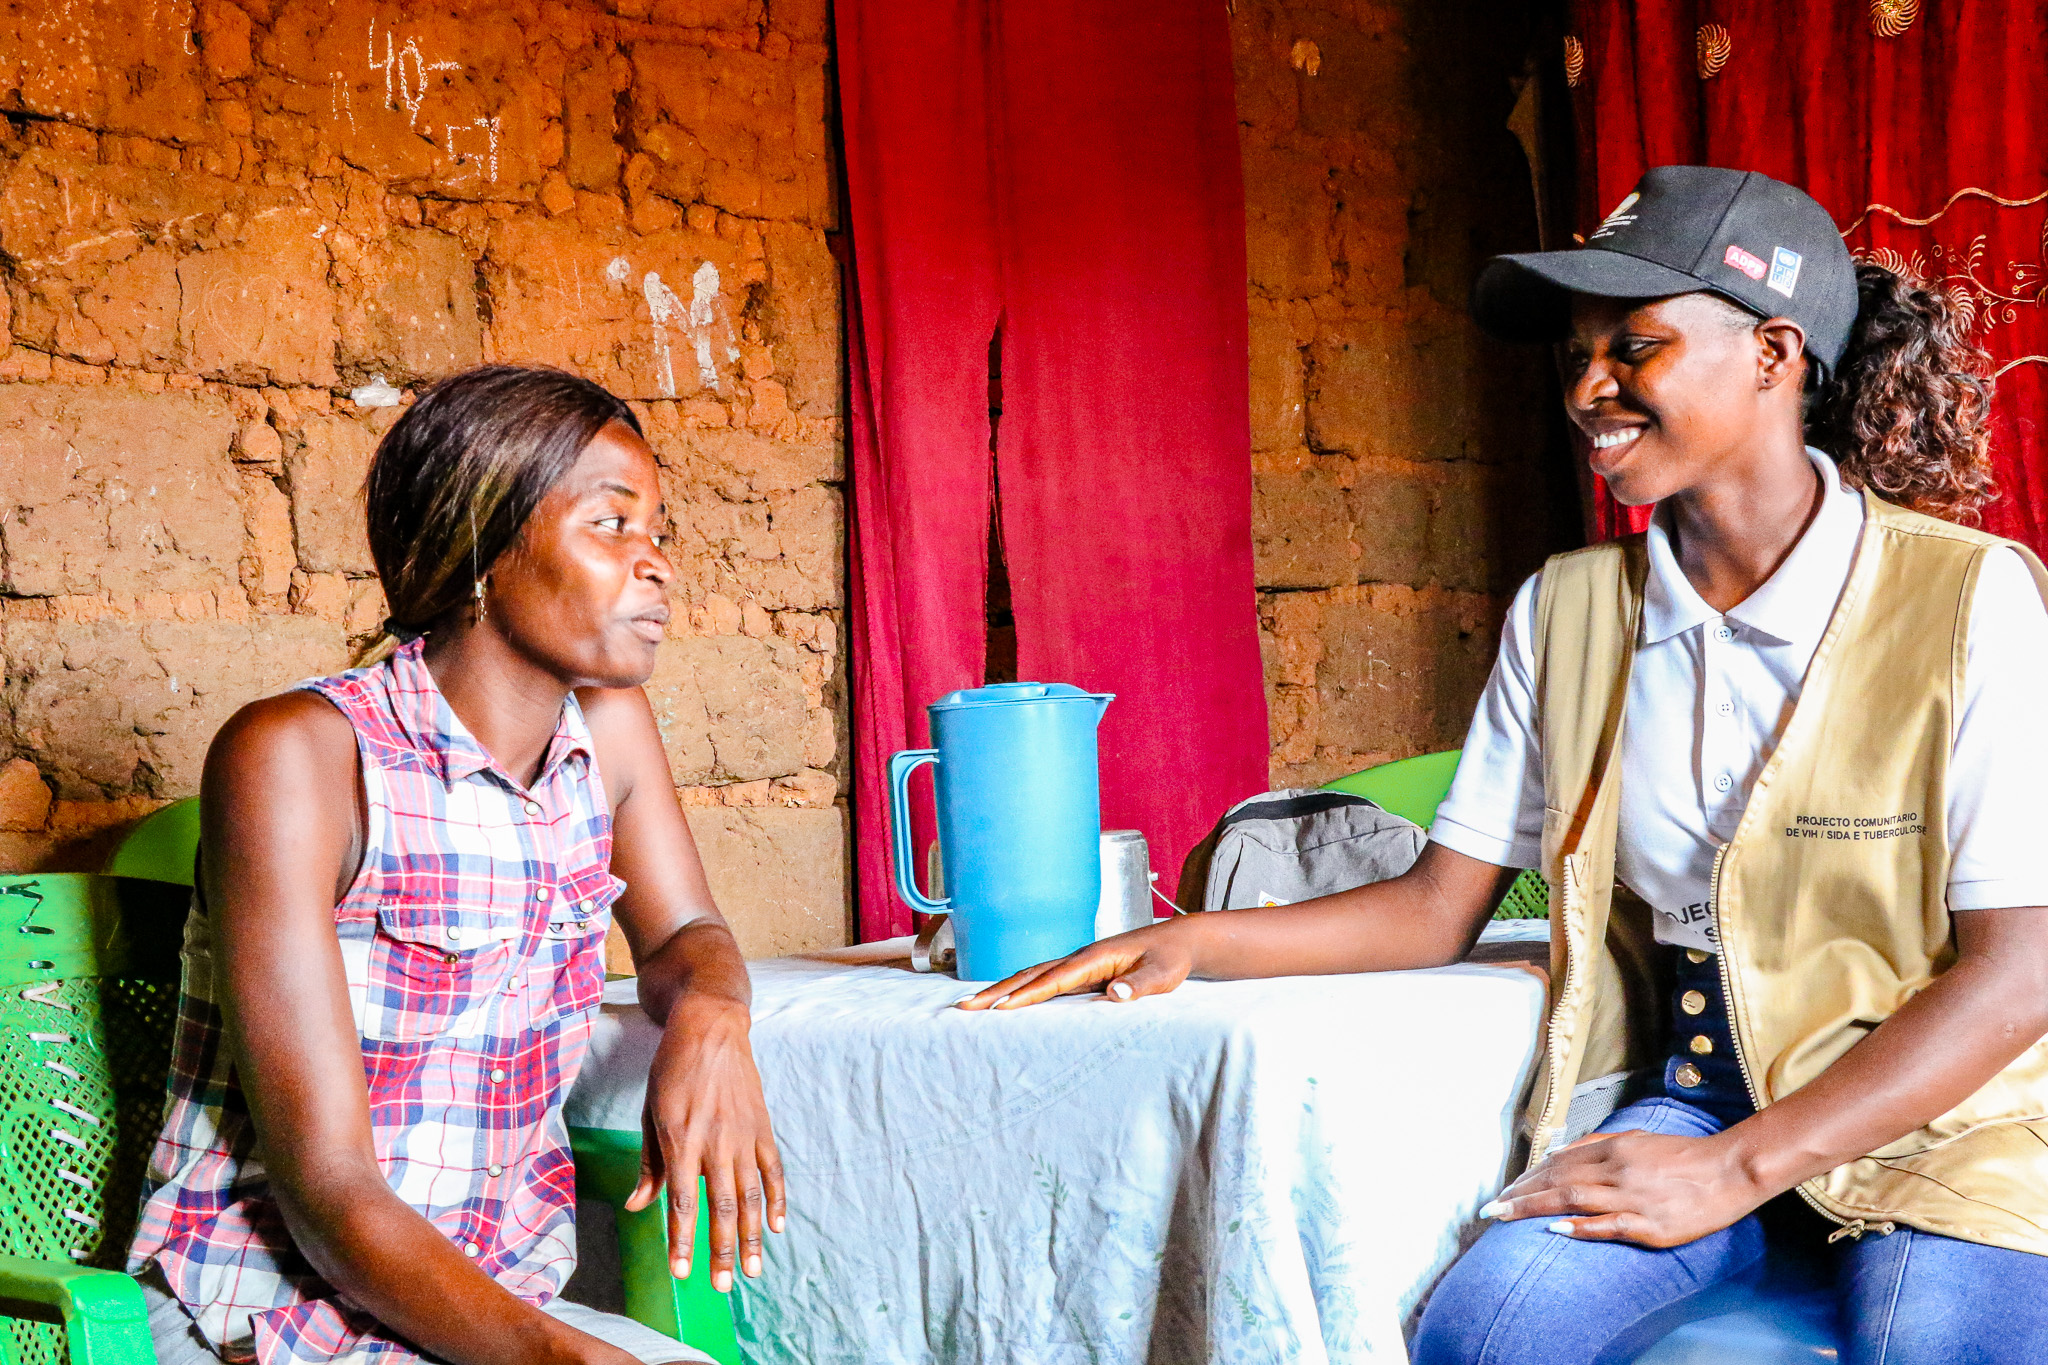 TB community health worker visiting a patient at home